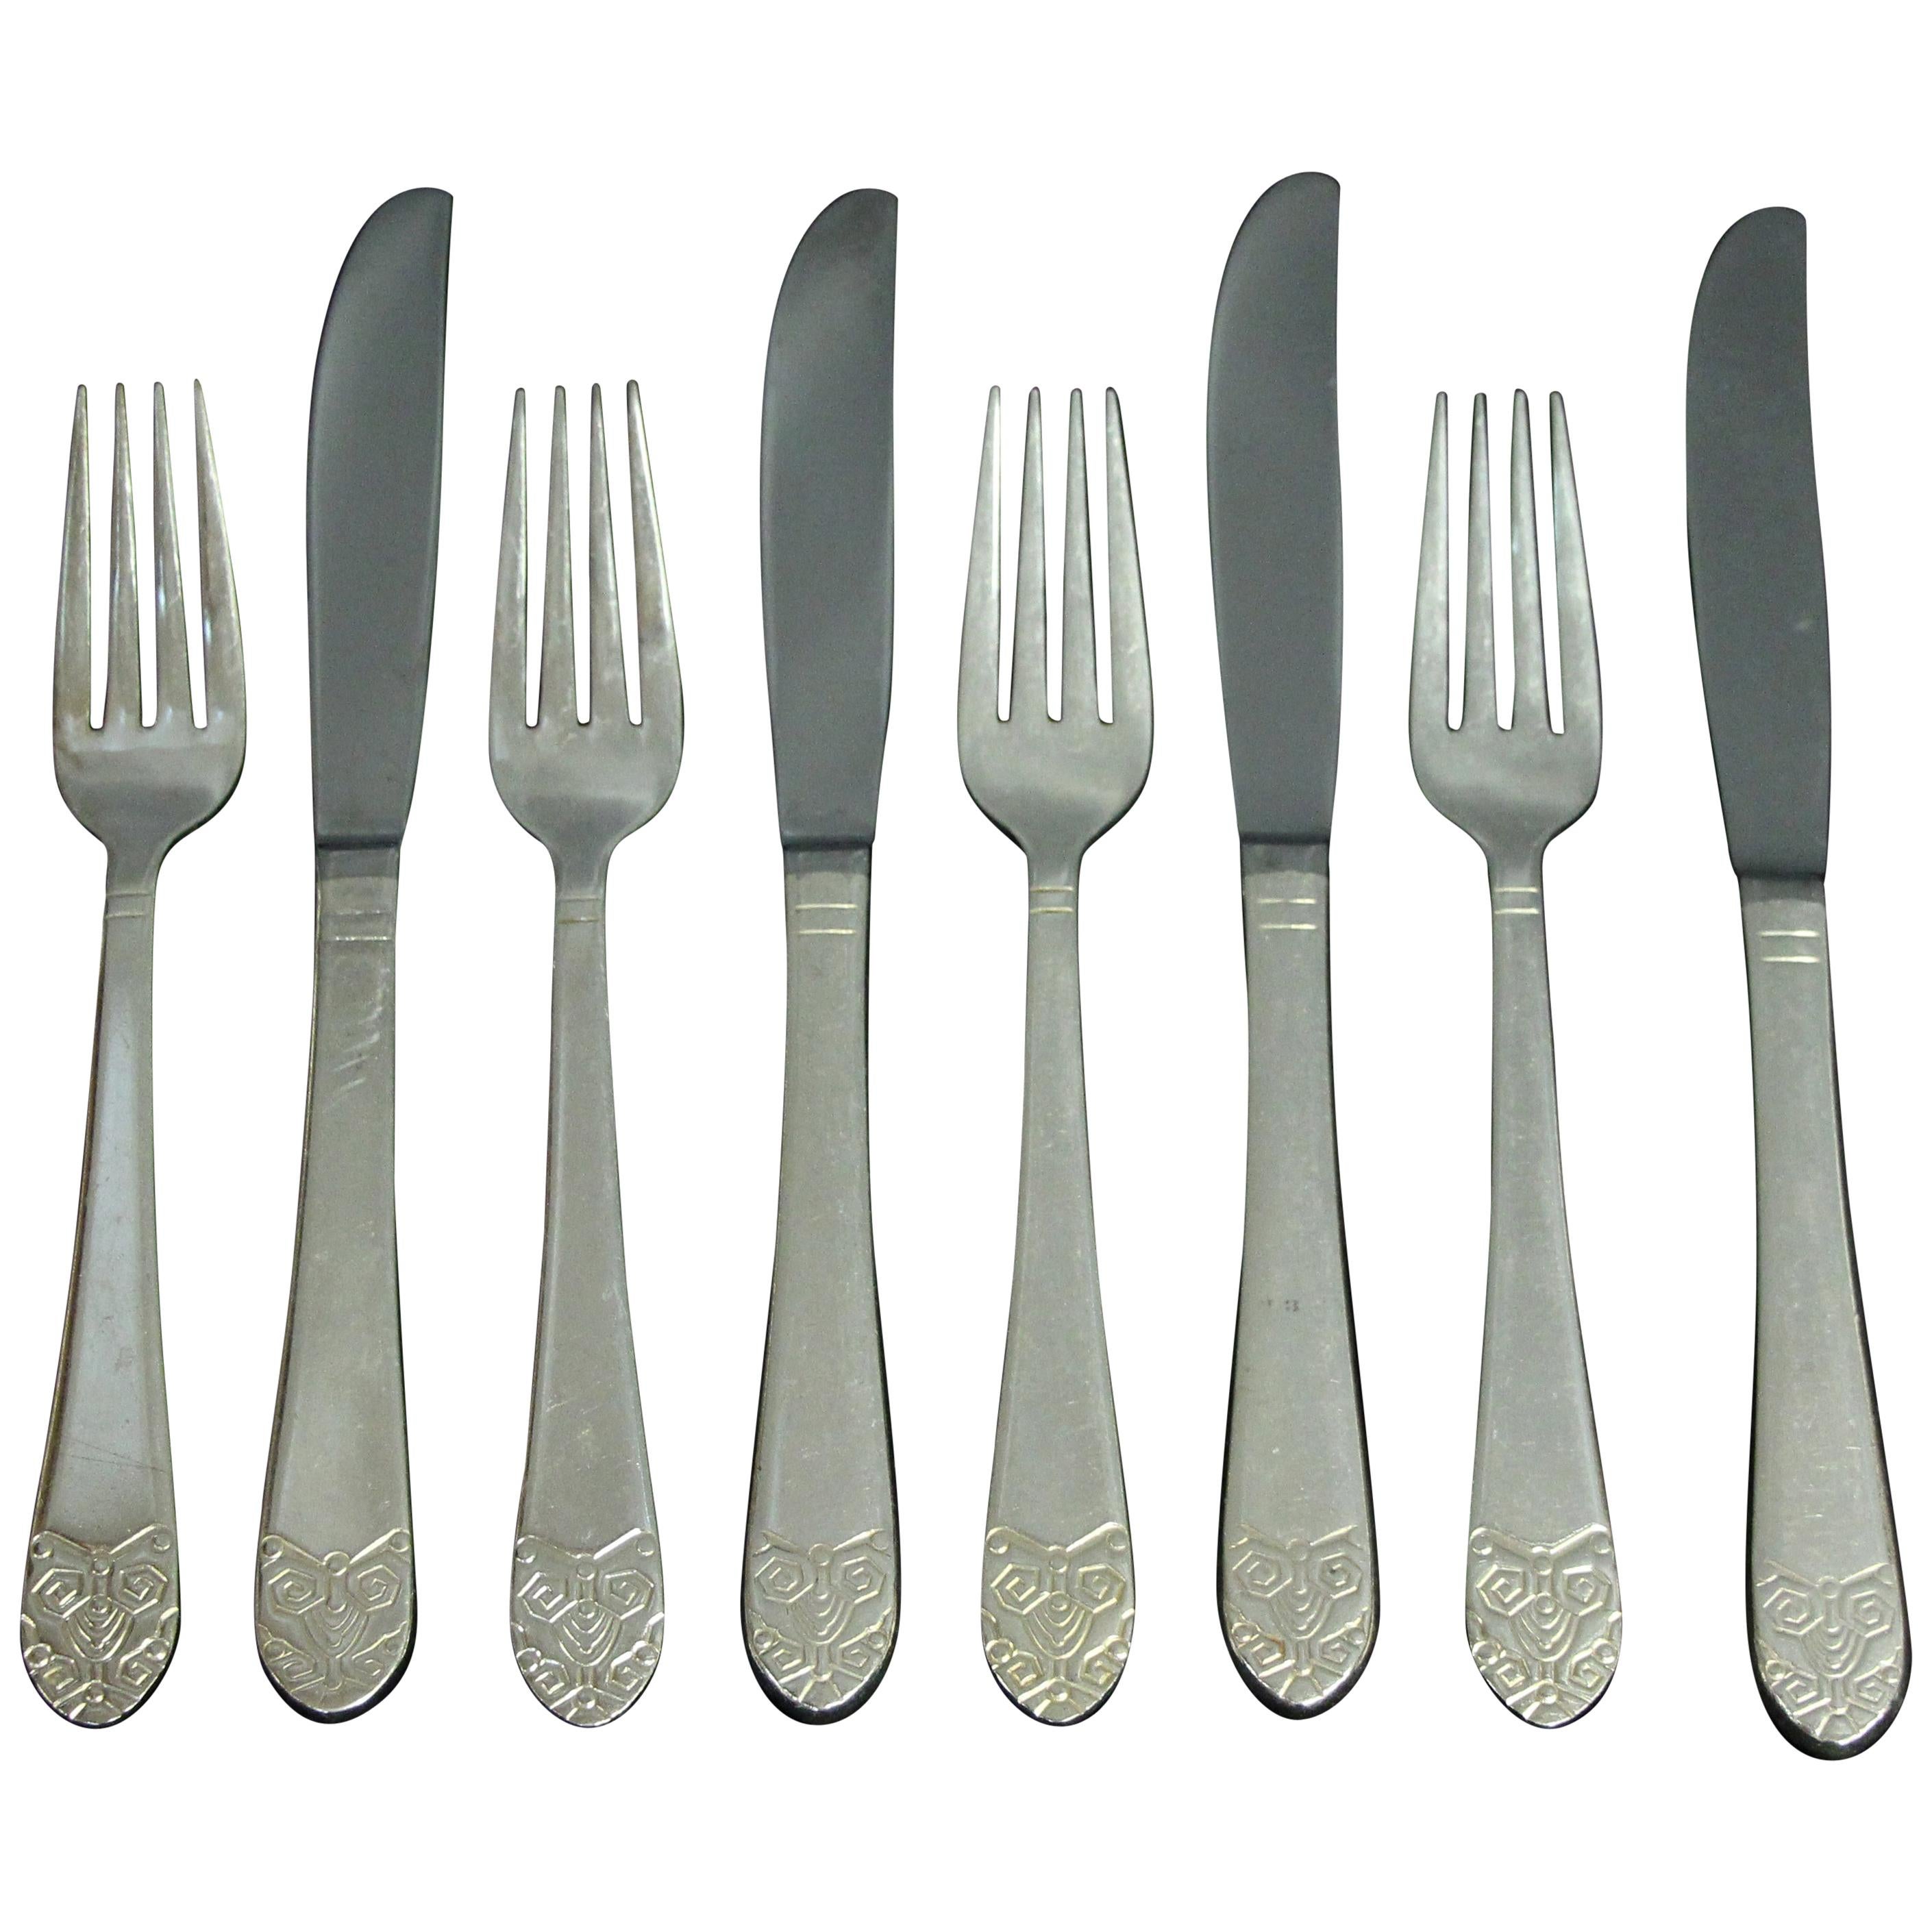 NYC Waldorf Astoria Hotel Silver Plated Eight Piece Dinner Knife & Fork Set